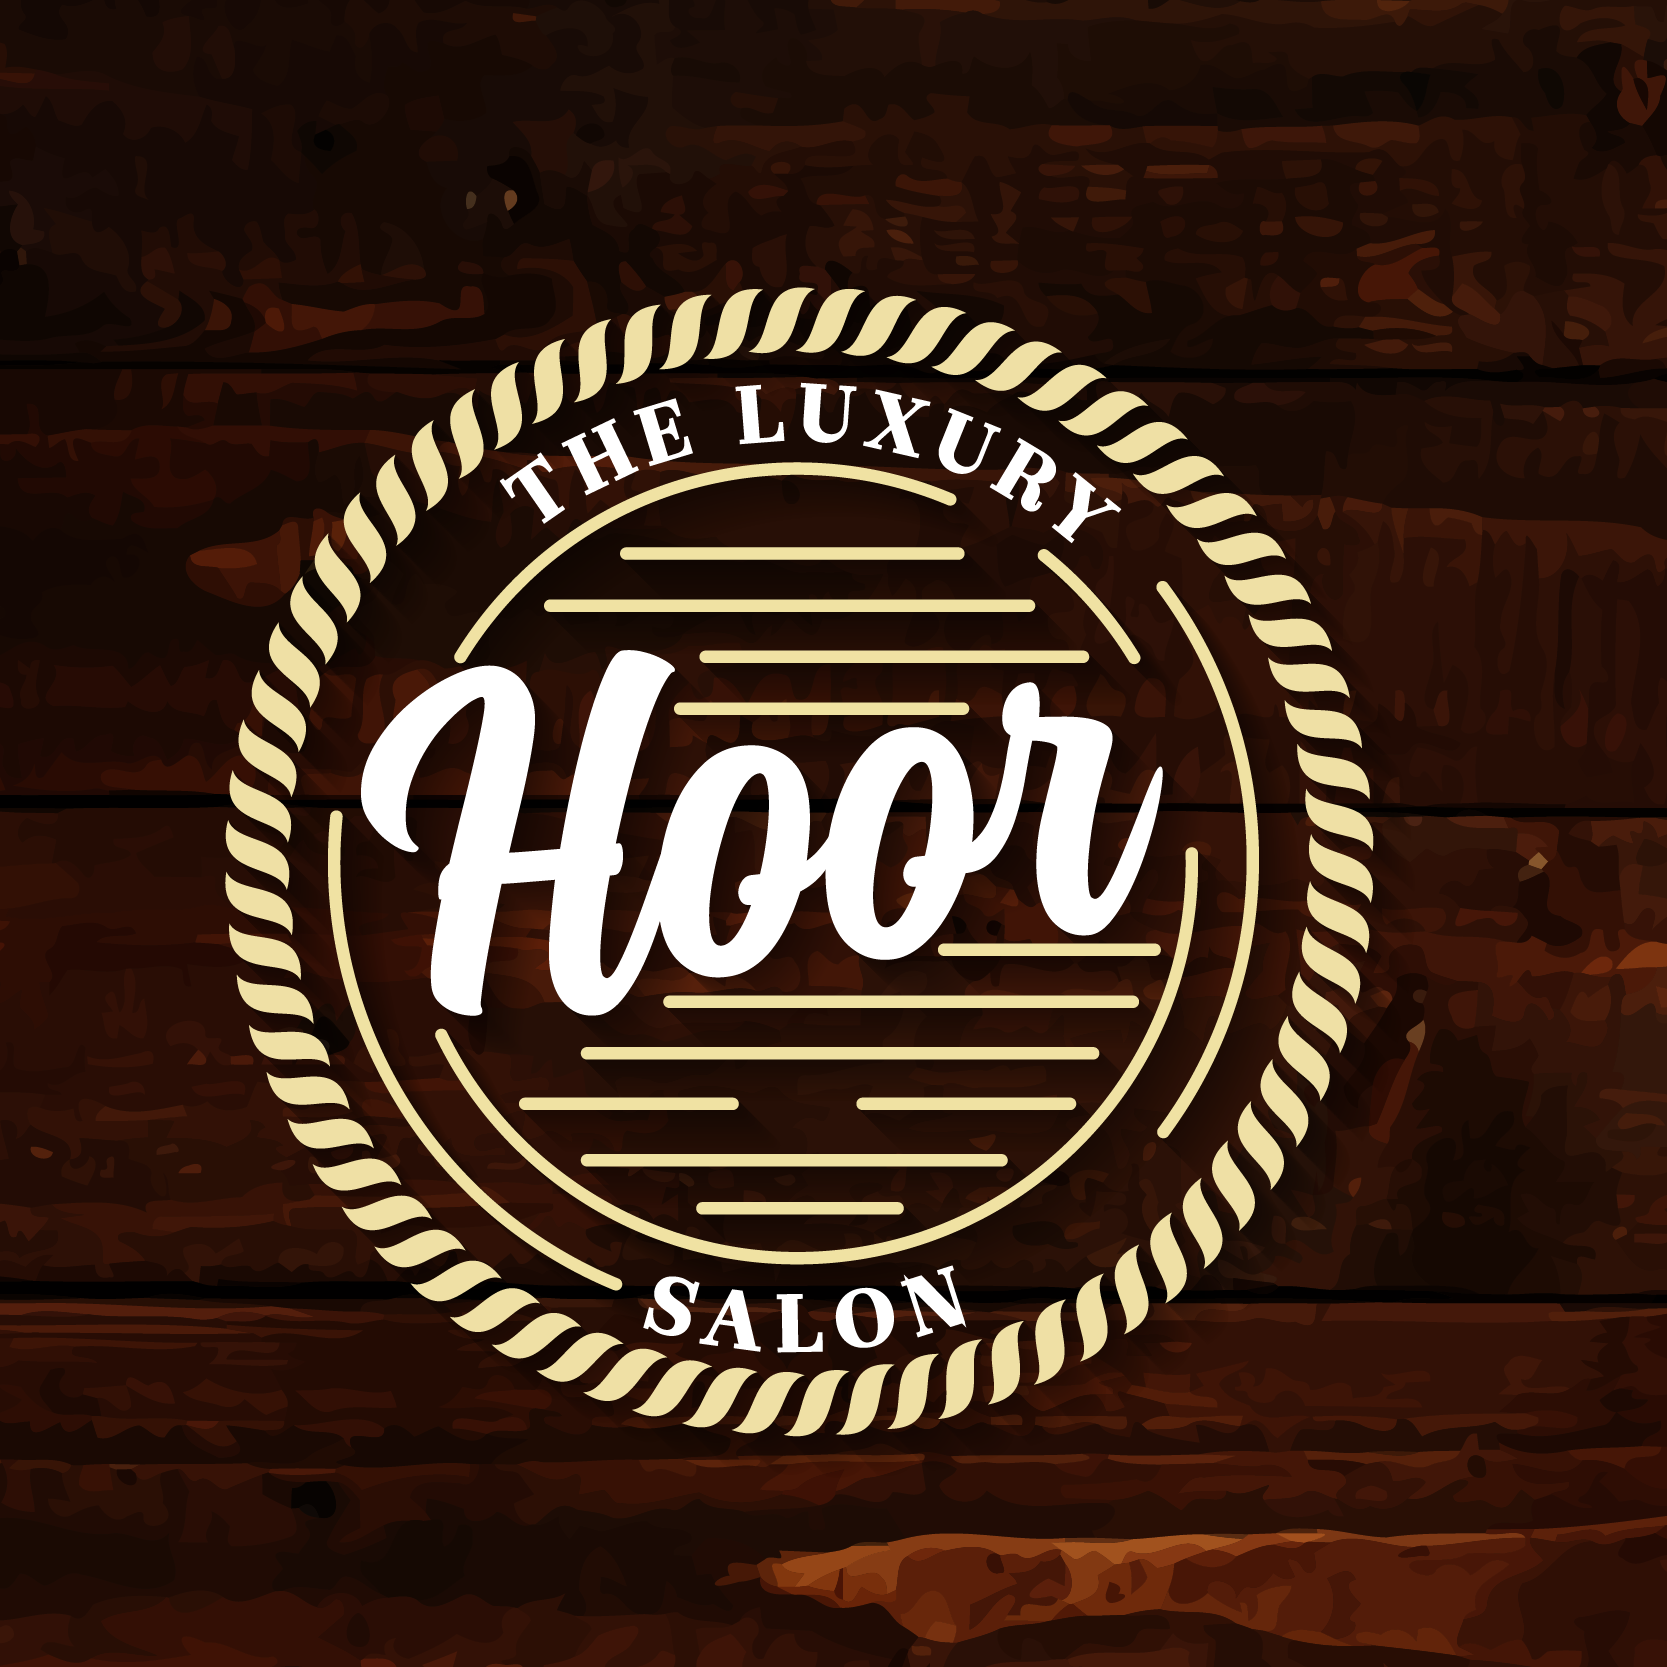 Hoor Luxury Salon|Gym and Fitness Centre|Active Life